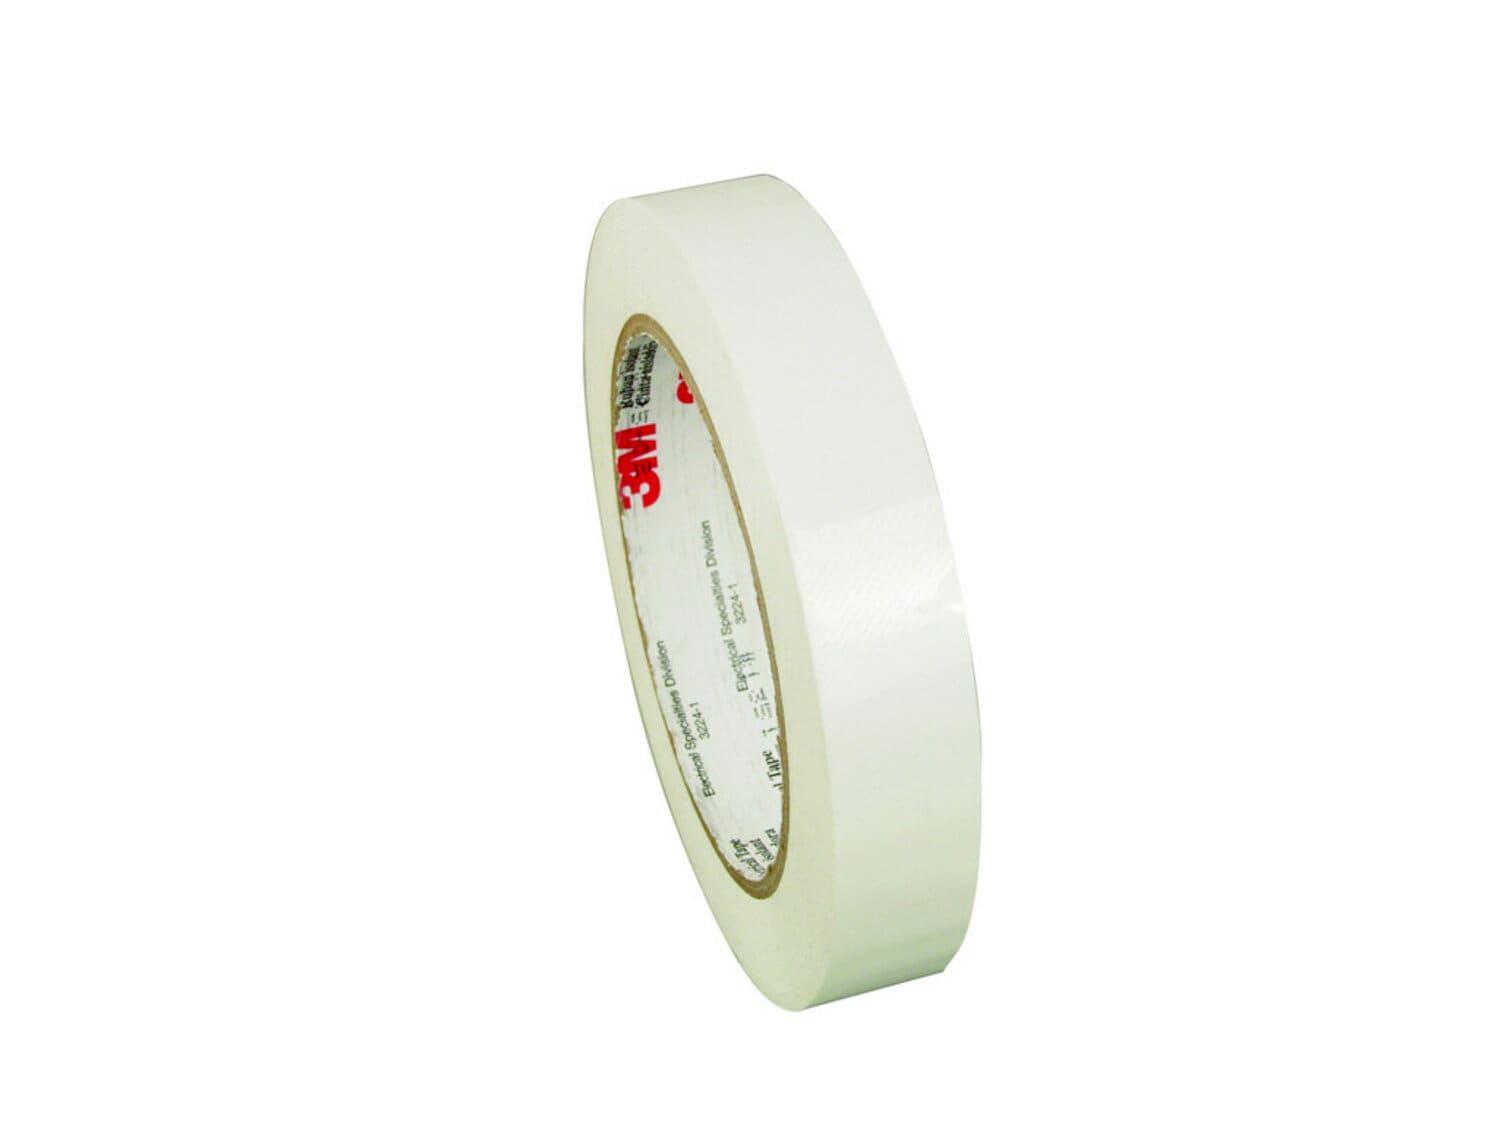 7010401262 - 3M Polyester Film Electrical Tape 1350F-1, White, 1 in x 72 yd, 3-in
paper core, Log roll, 12 Rolls/Case